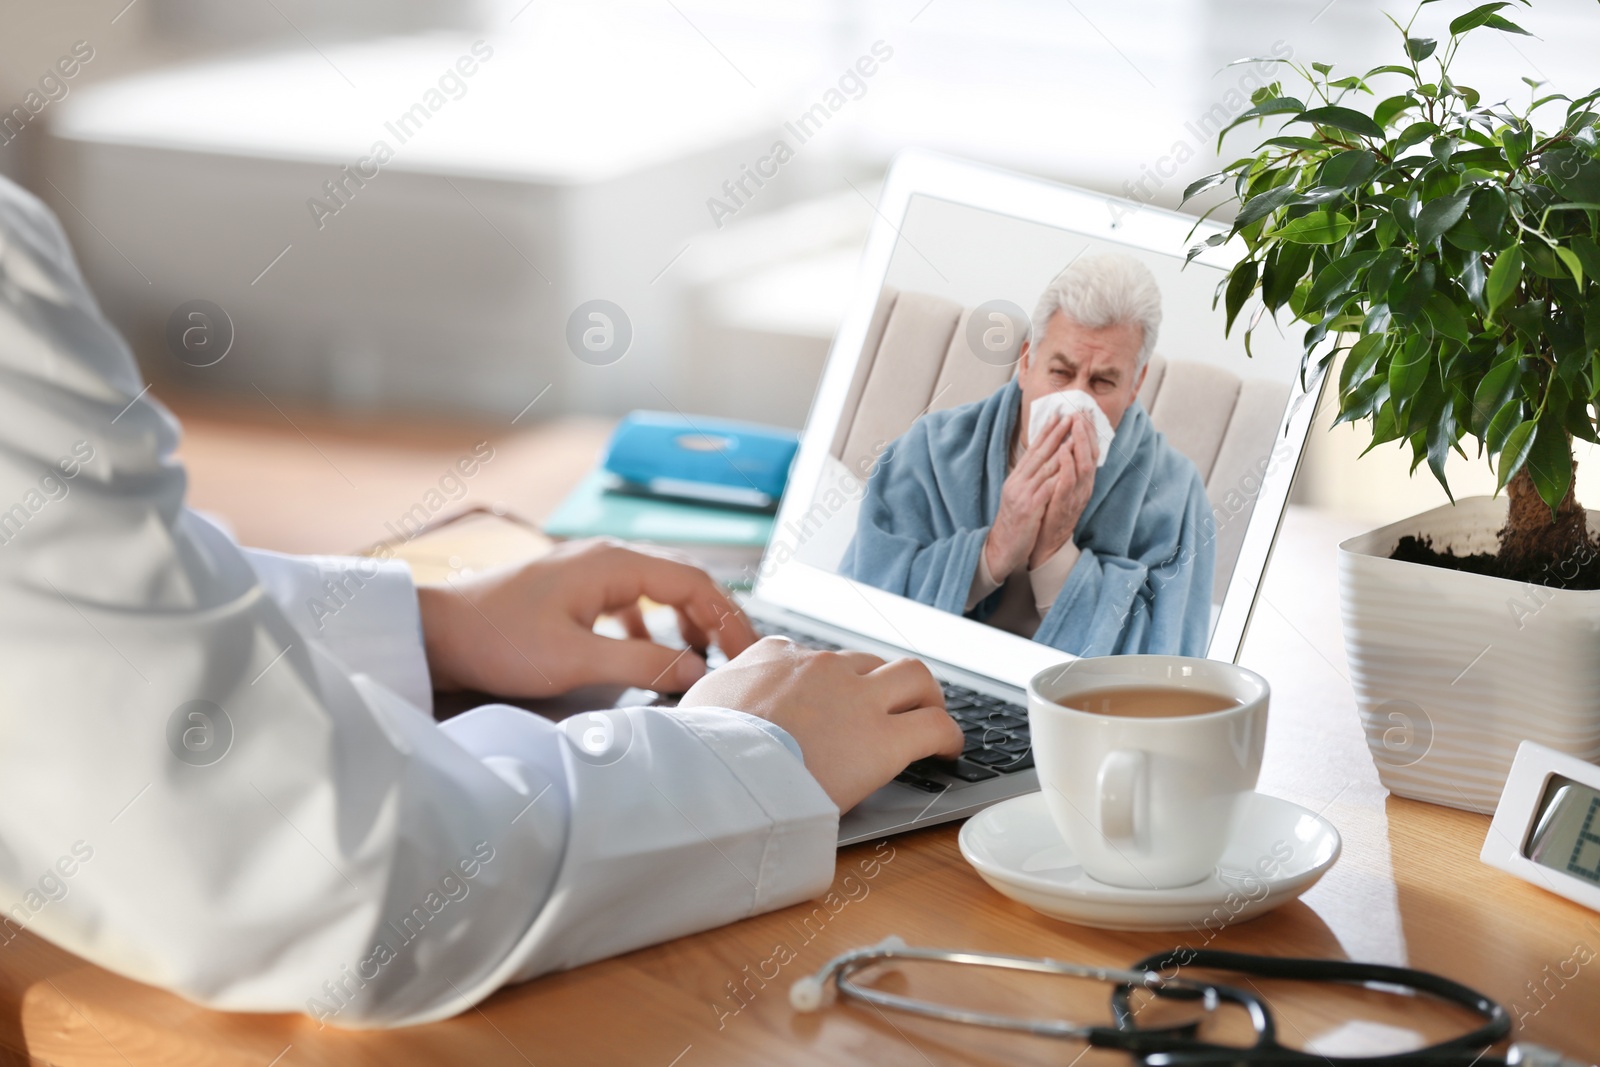 Image of Doctor consulting sick patient online by video chat in medical office, closeup